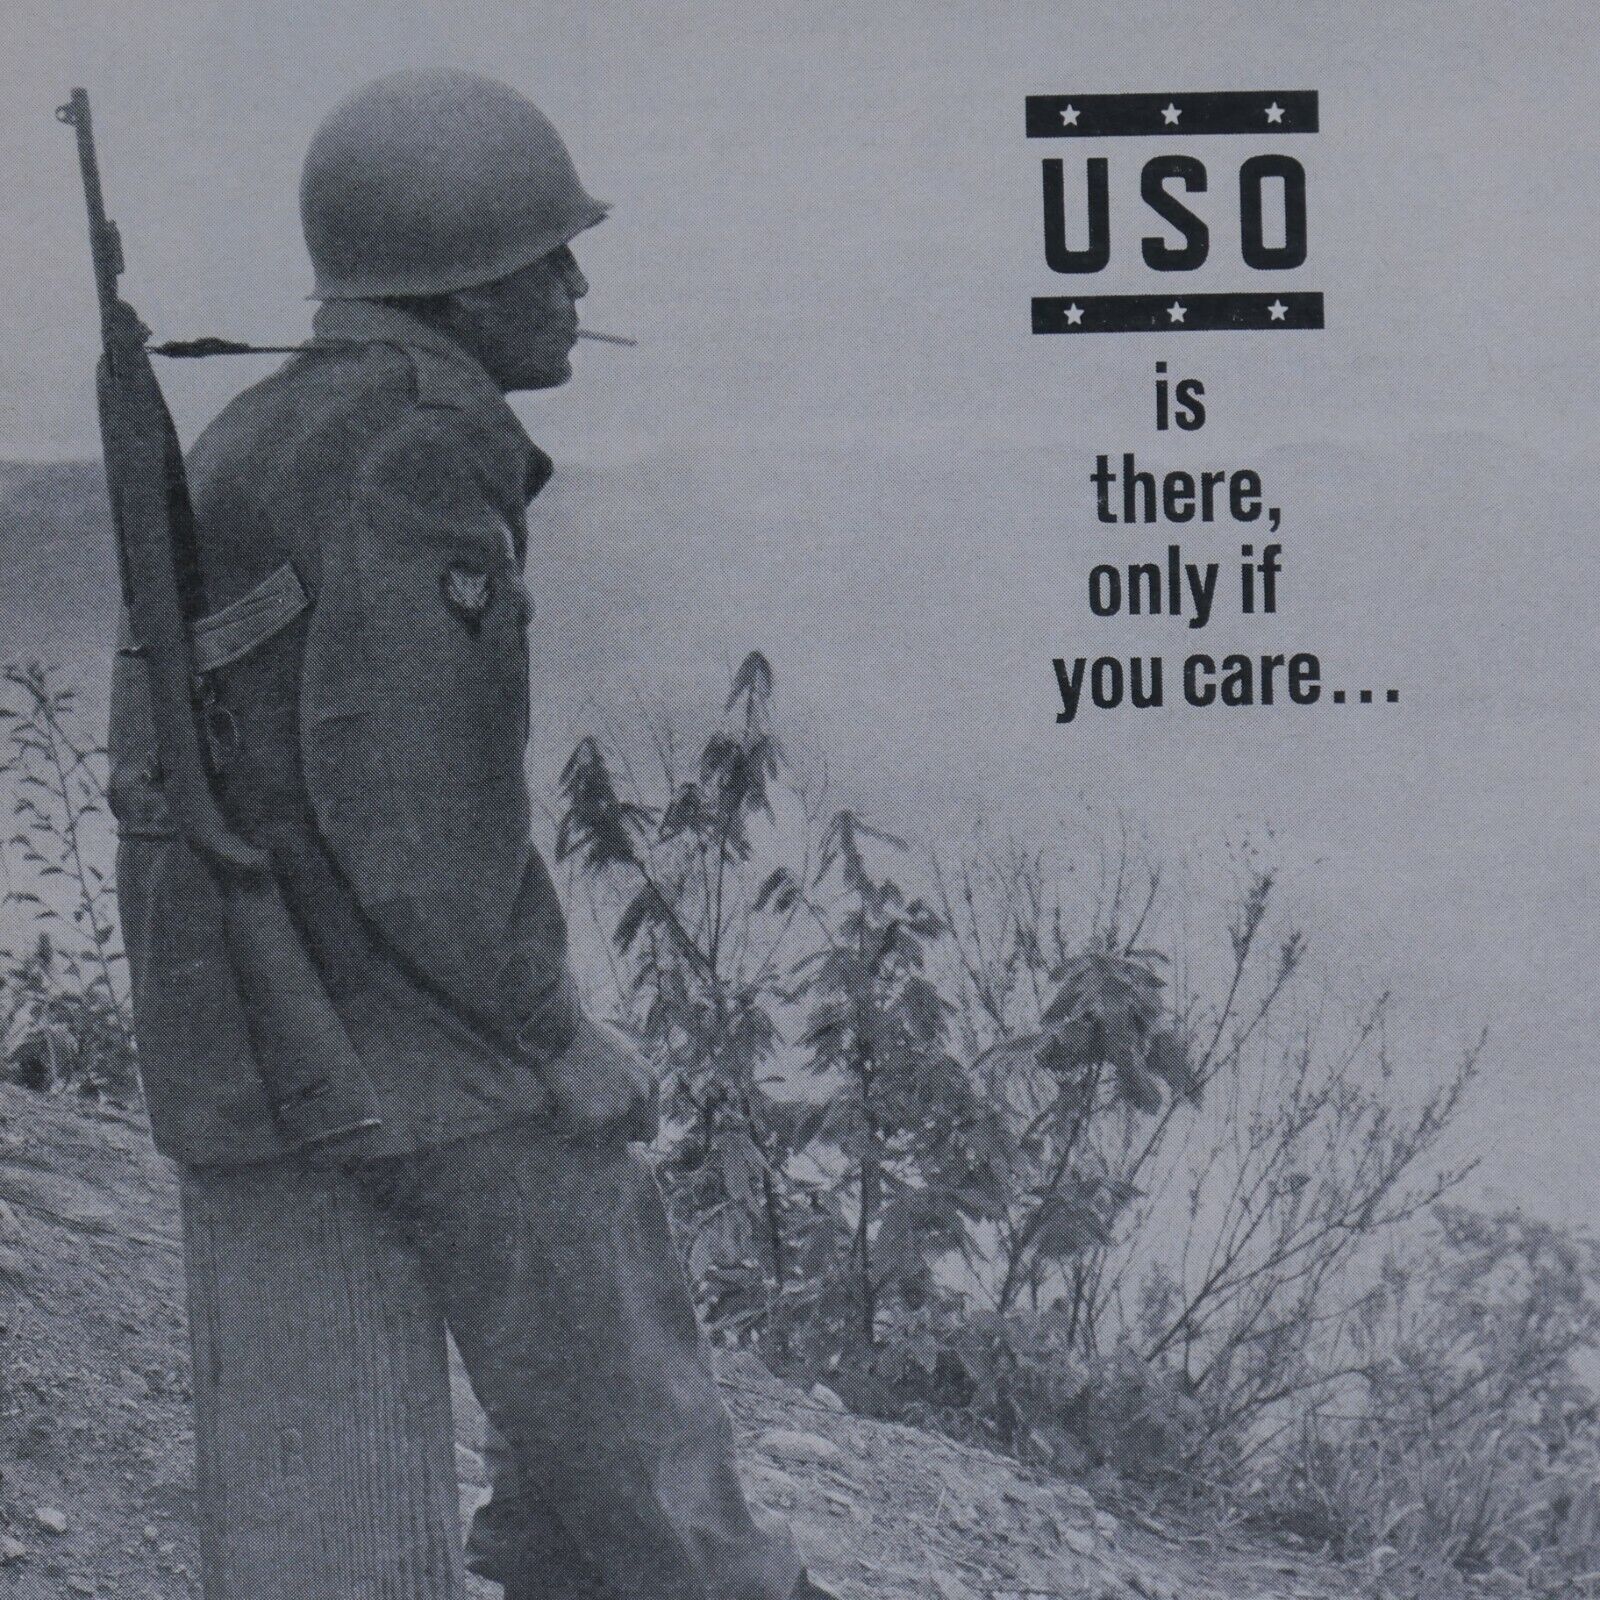 1965 U.S.O. Vintage Is There Only If You If Care Original Print 8.5 x 11